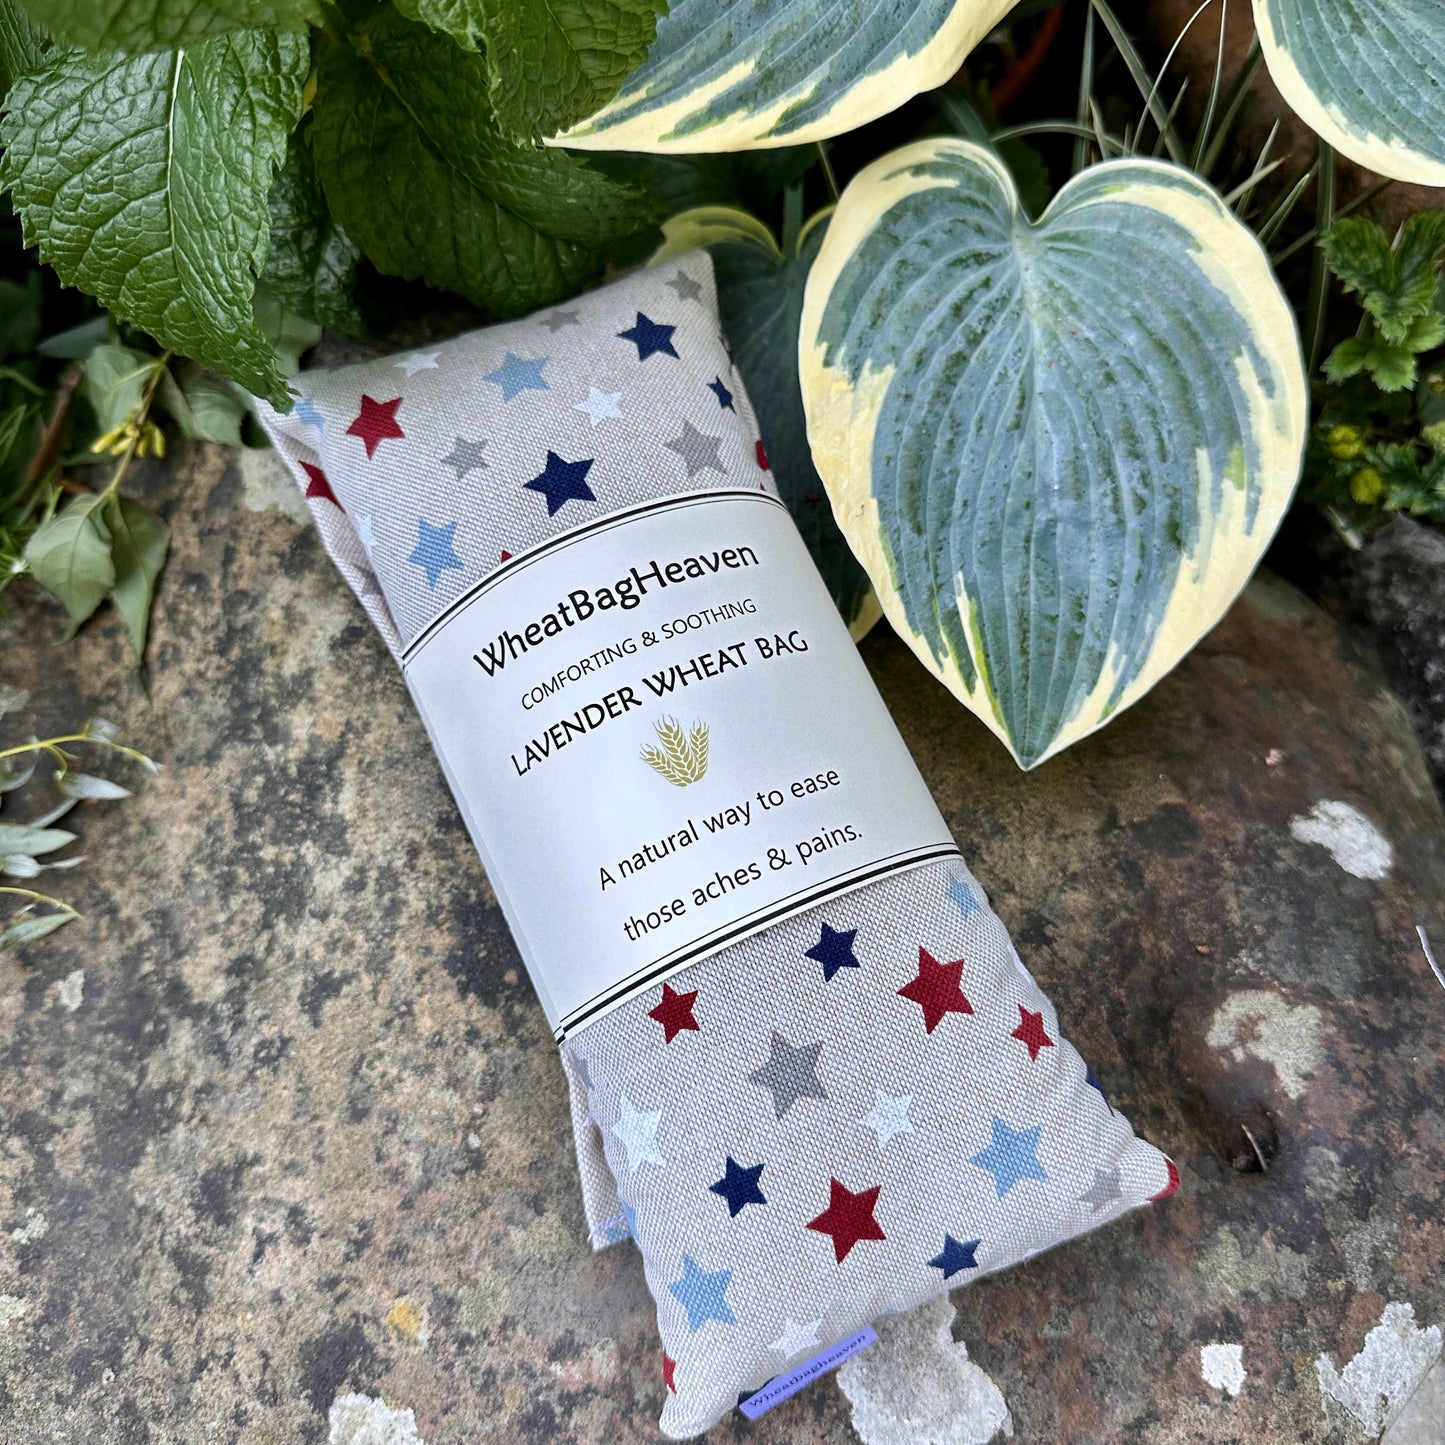 Long Wheat bags. Star cotton fabric heat pack with lavender flower for relaxation.